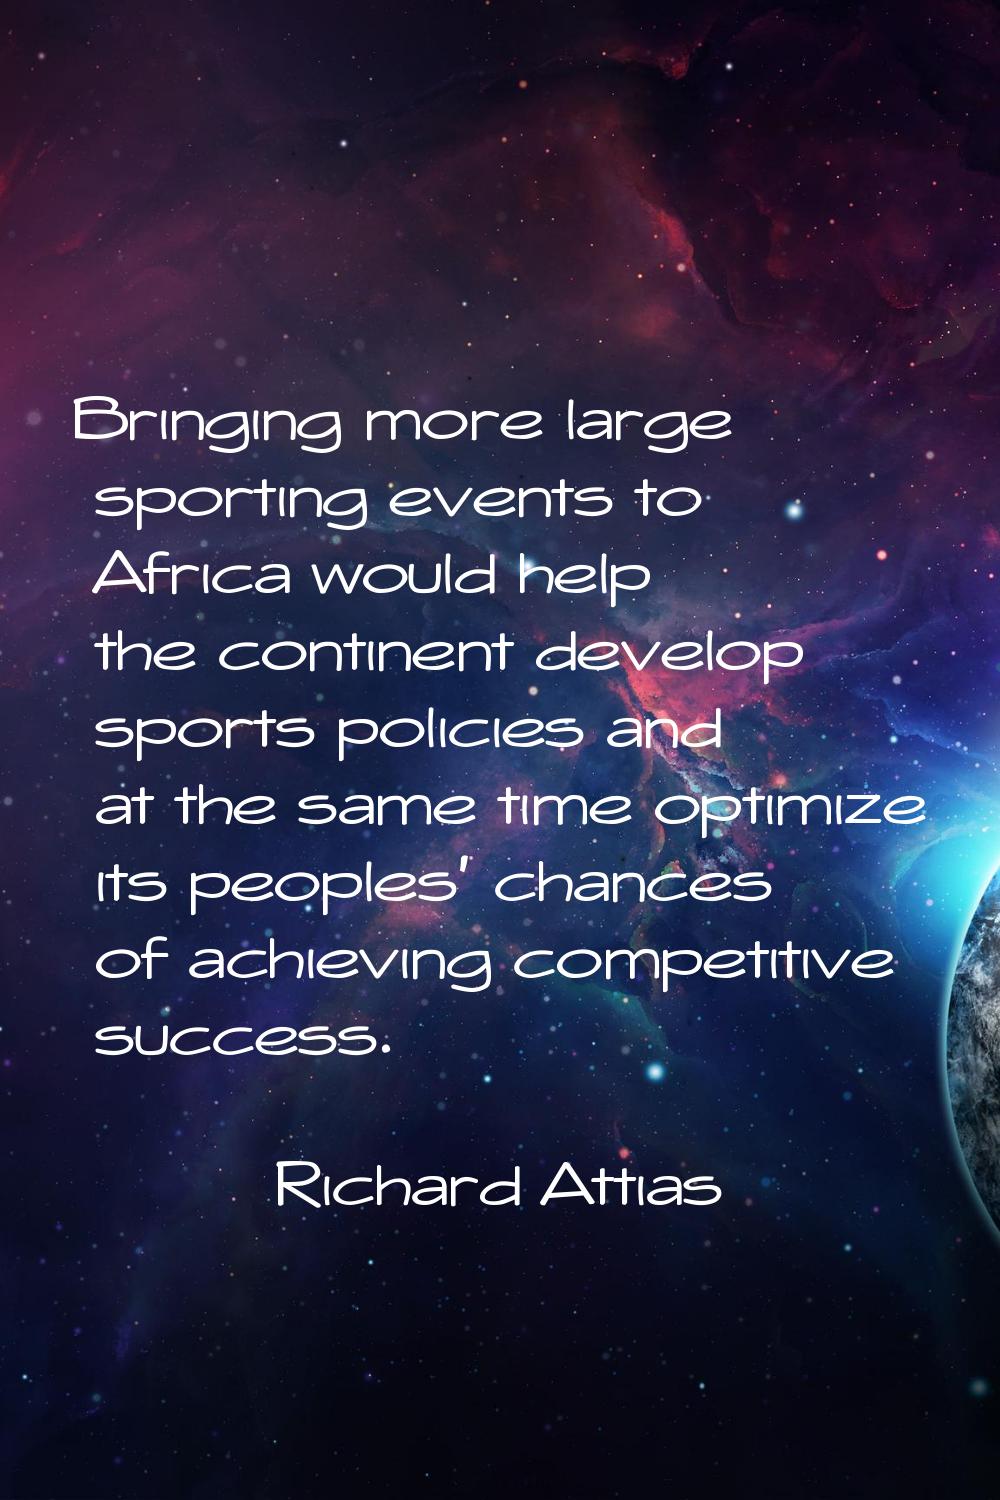 Bringing more large sporting events to Africa would help the continent develop sports policies and 